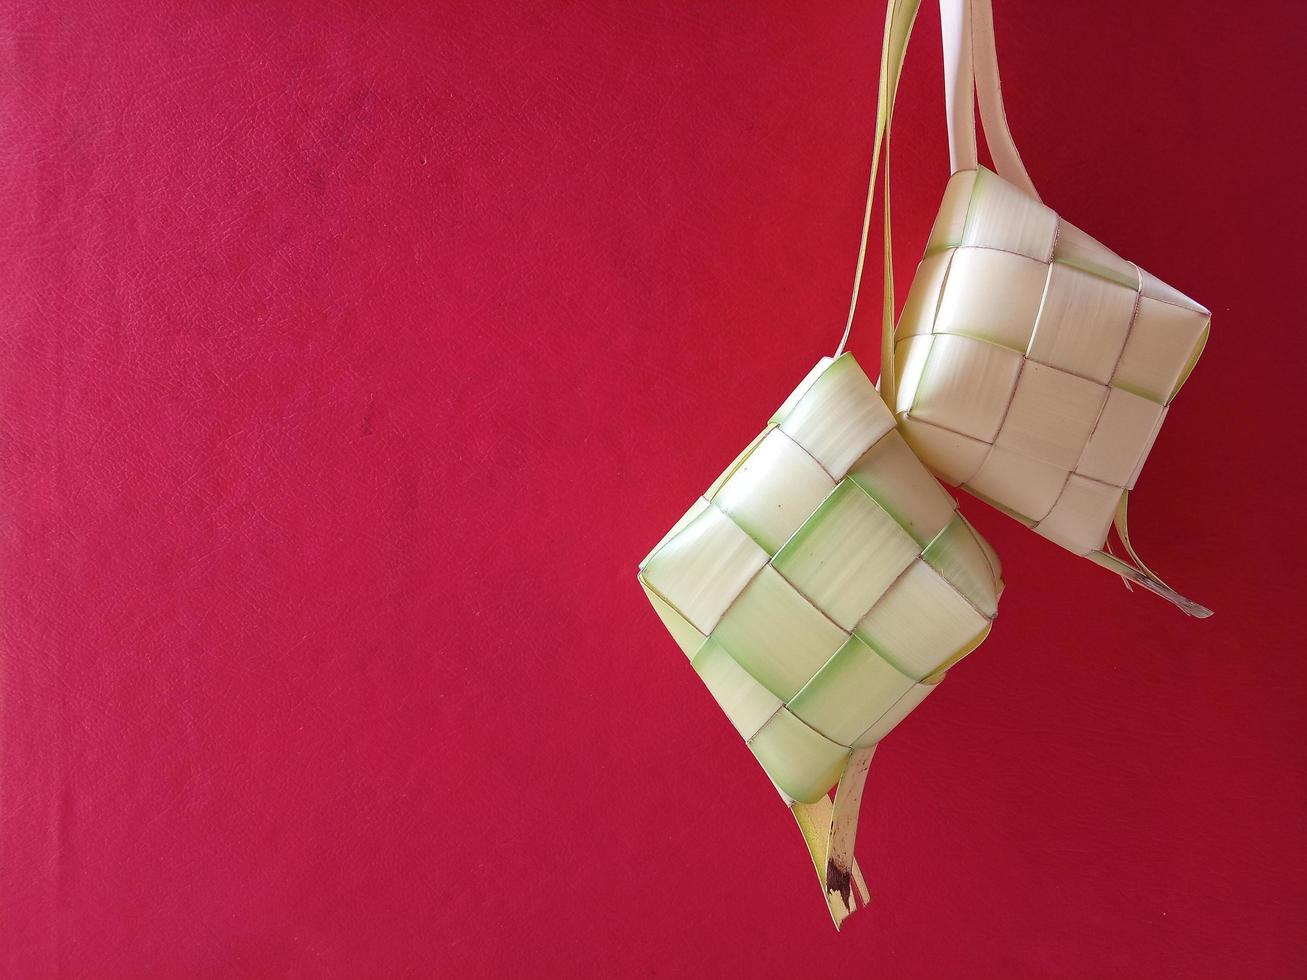 Ketupat in Indonesia is a kind of way of cooking rice with coconut leaves shaped like a diamond. Usually appears on Eid al-Fitr. Conceptual photo of ketupat on red background